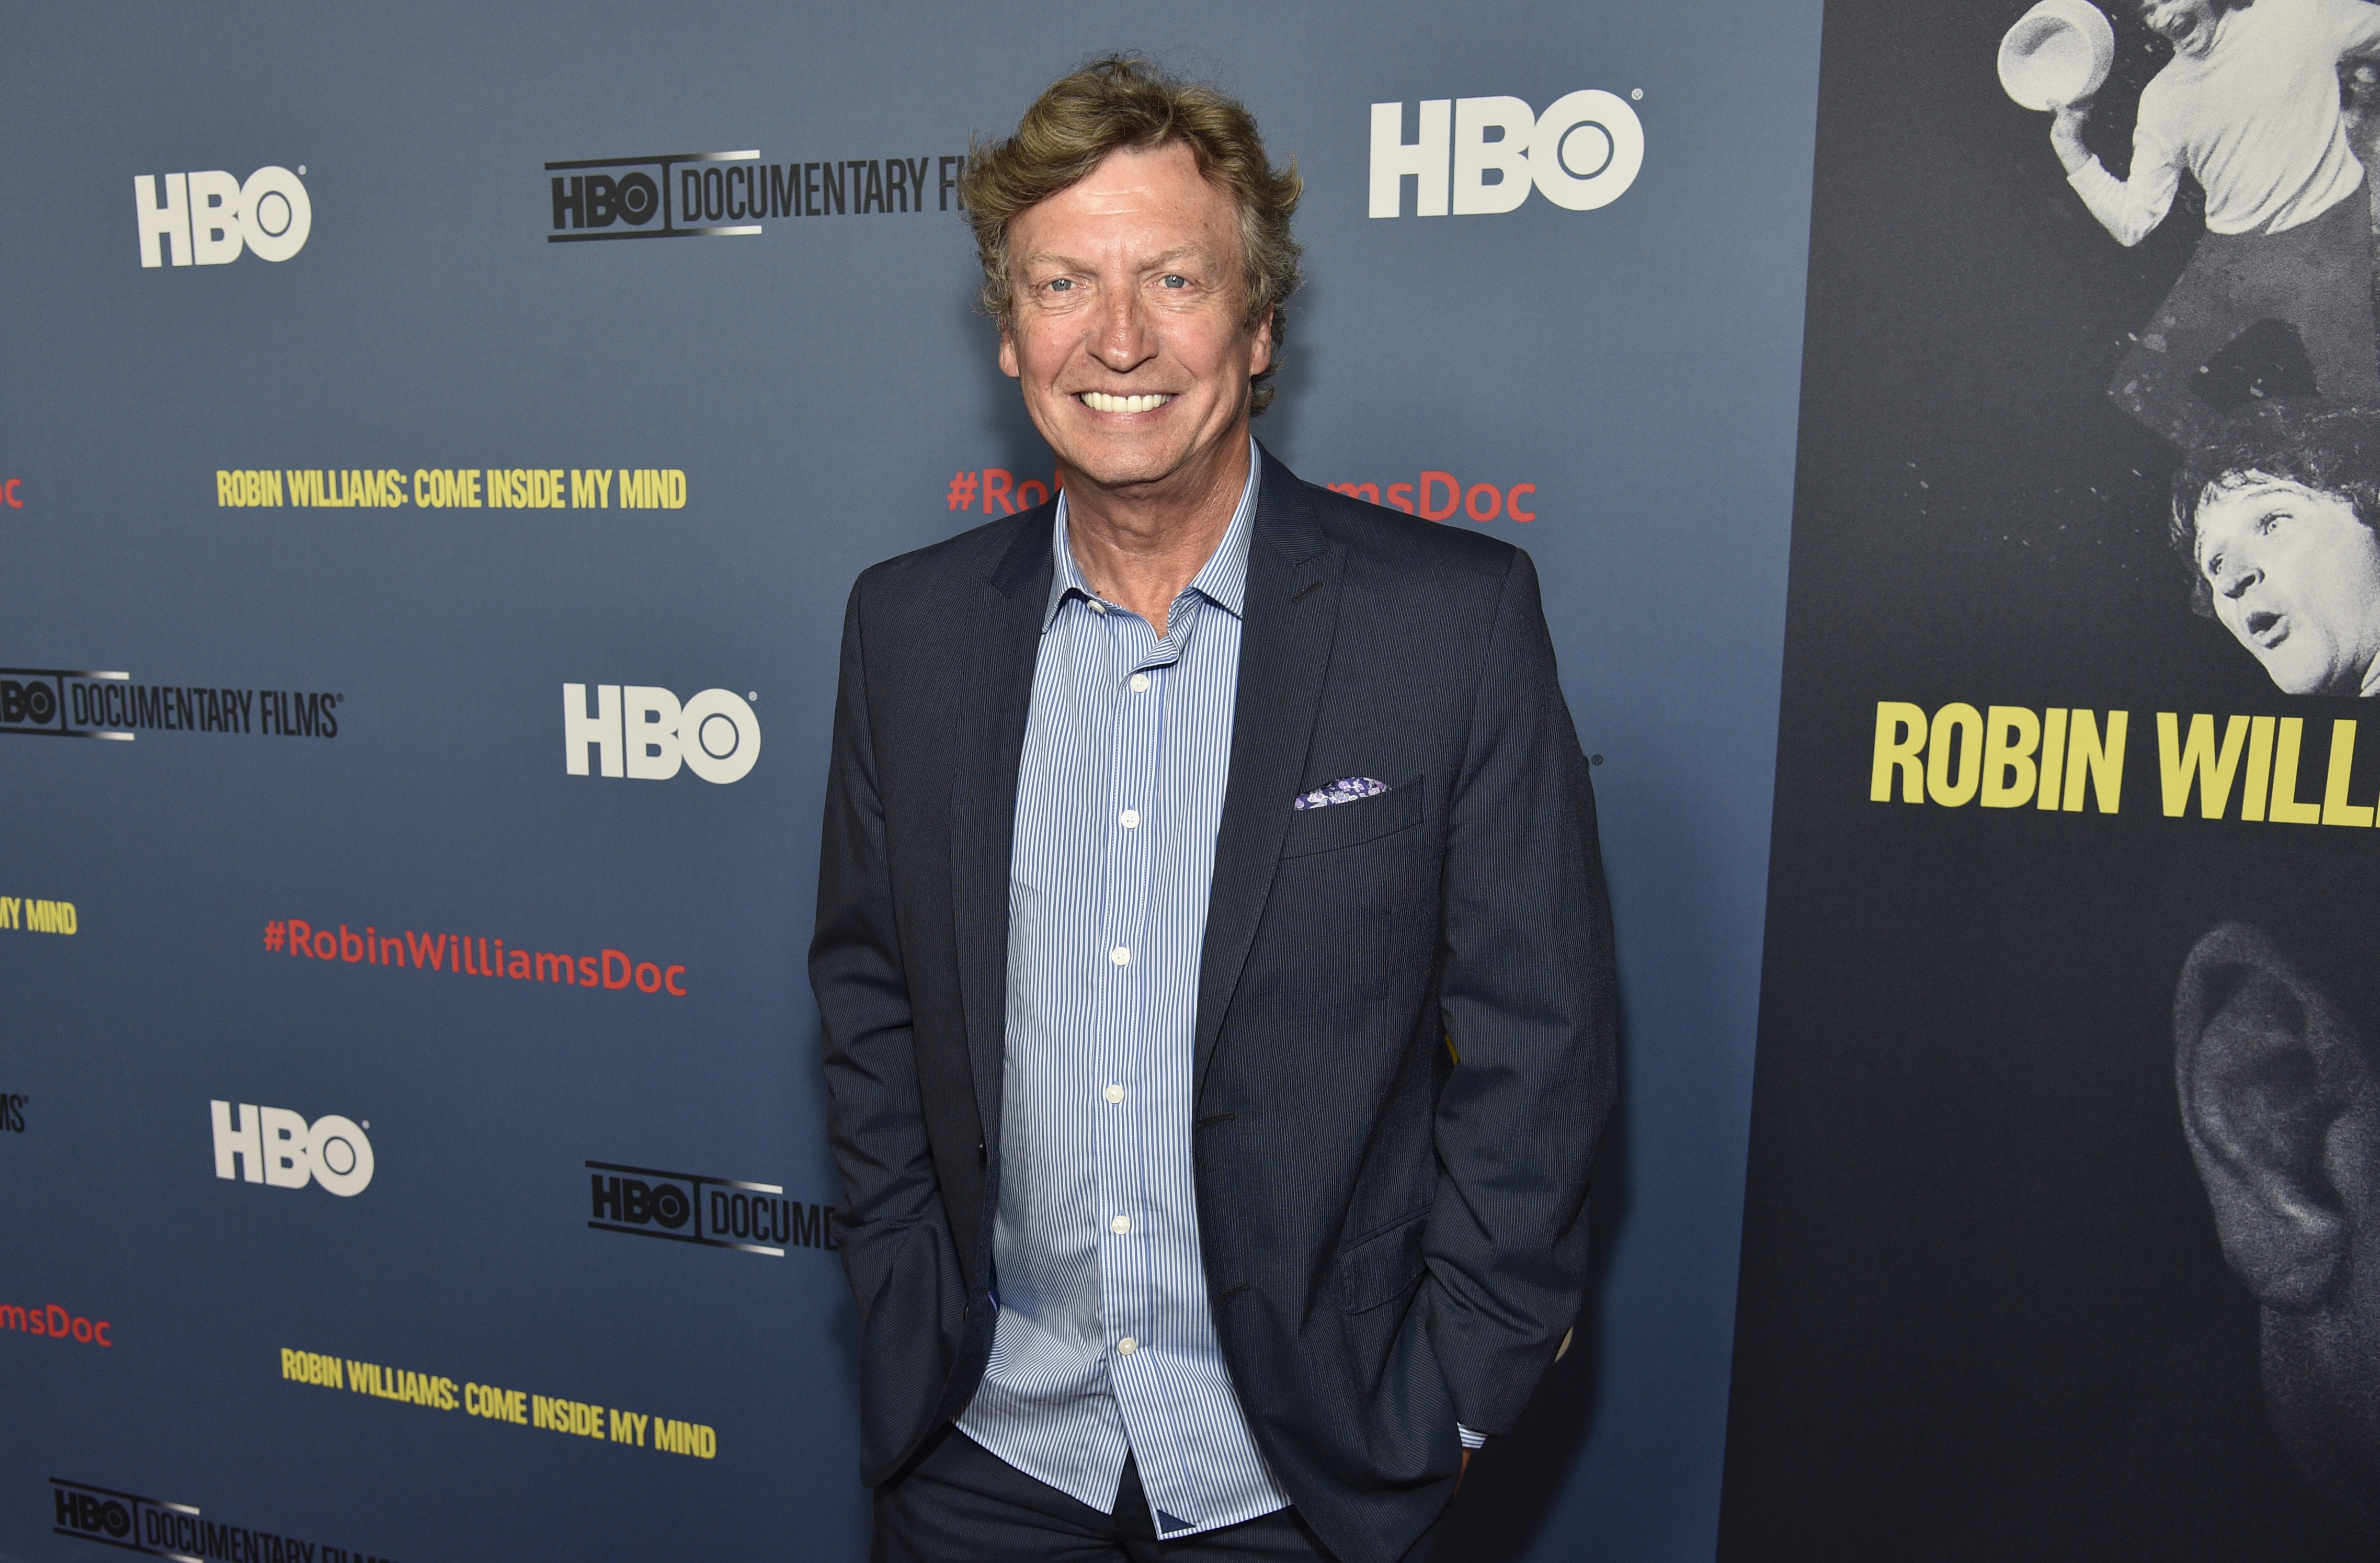 FILE - Nigel Lythgoe arrives at the Los Angeles premiere of "Robin Williams: Come Inside My Mind" at the TCL Chinese Theatre on Wednesday, June 27, 2018. TV producer Nigel Lythgoe said Friday, Jan. 5, 2024 that he is stepping aside as a judge on “So You Think You Can Dance” after lawsuits accusing him of sexual assault, including one from Paula Abdul. (Photo by Chris Pizzello/Invision/AP, File)